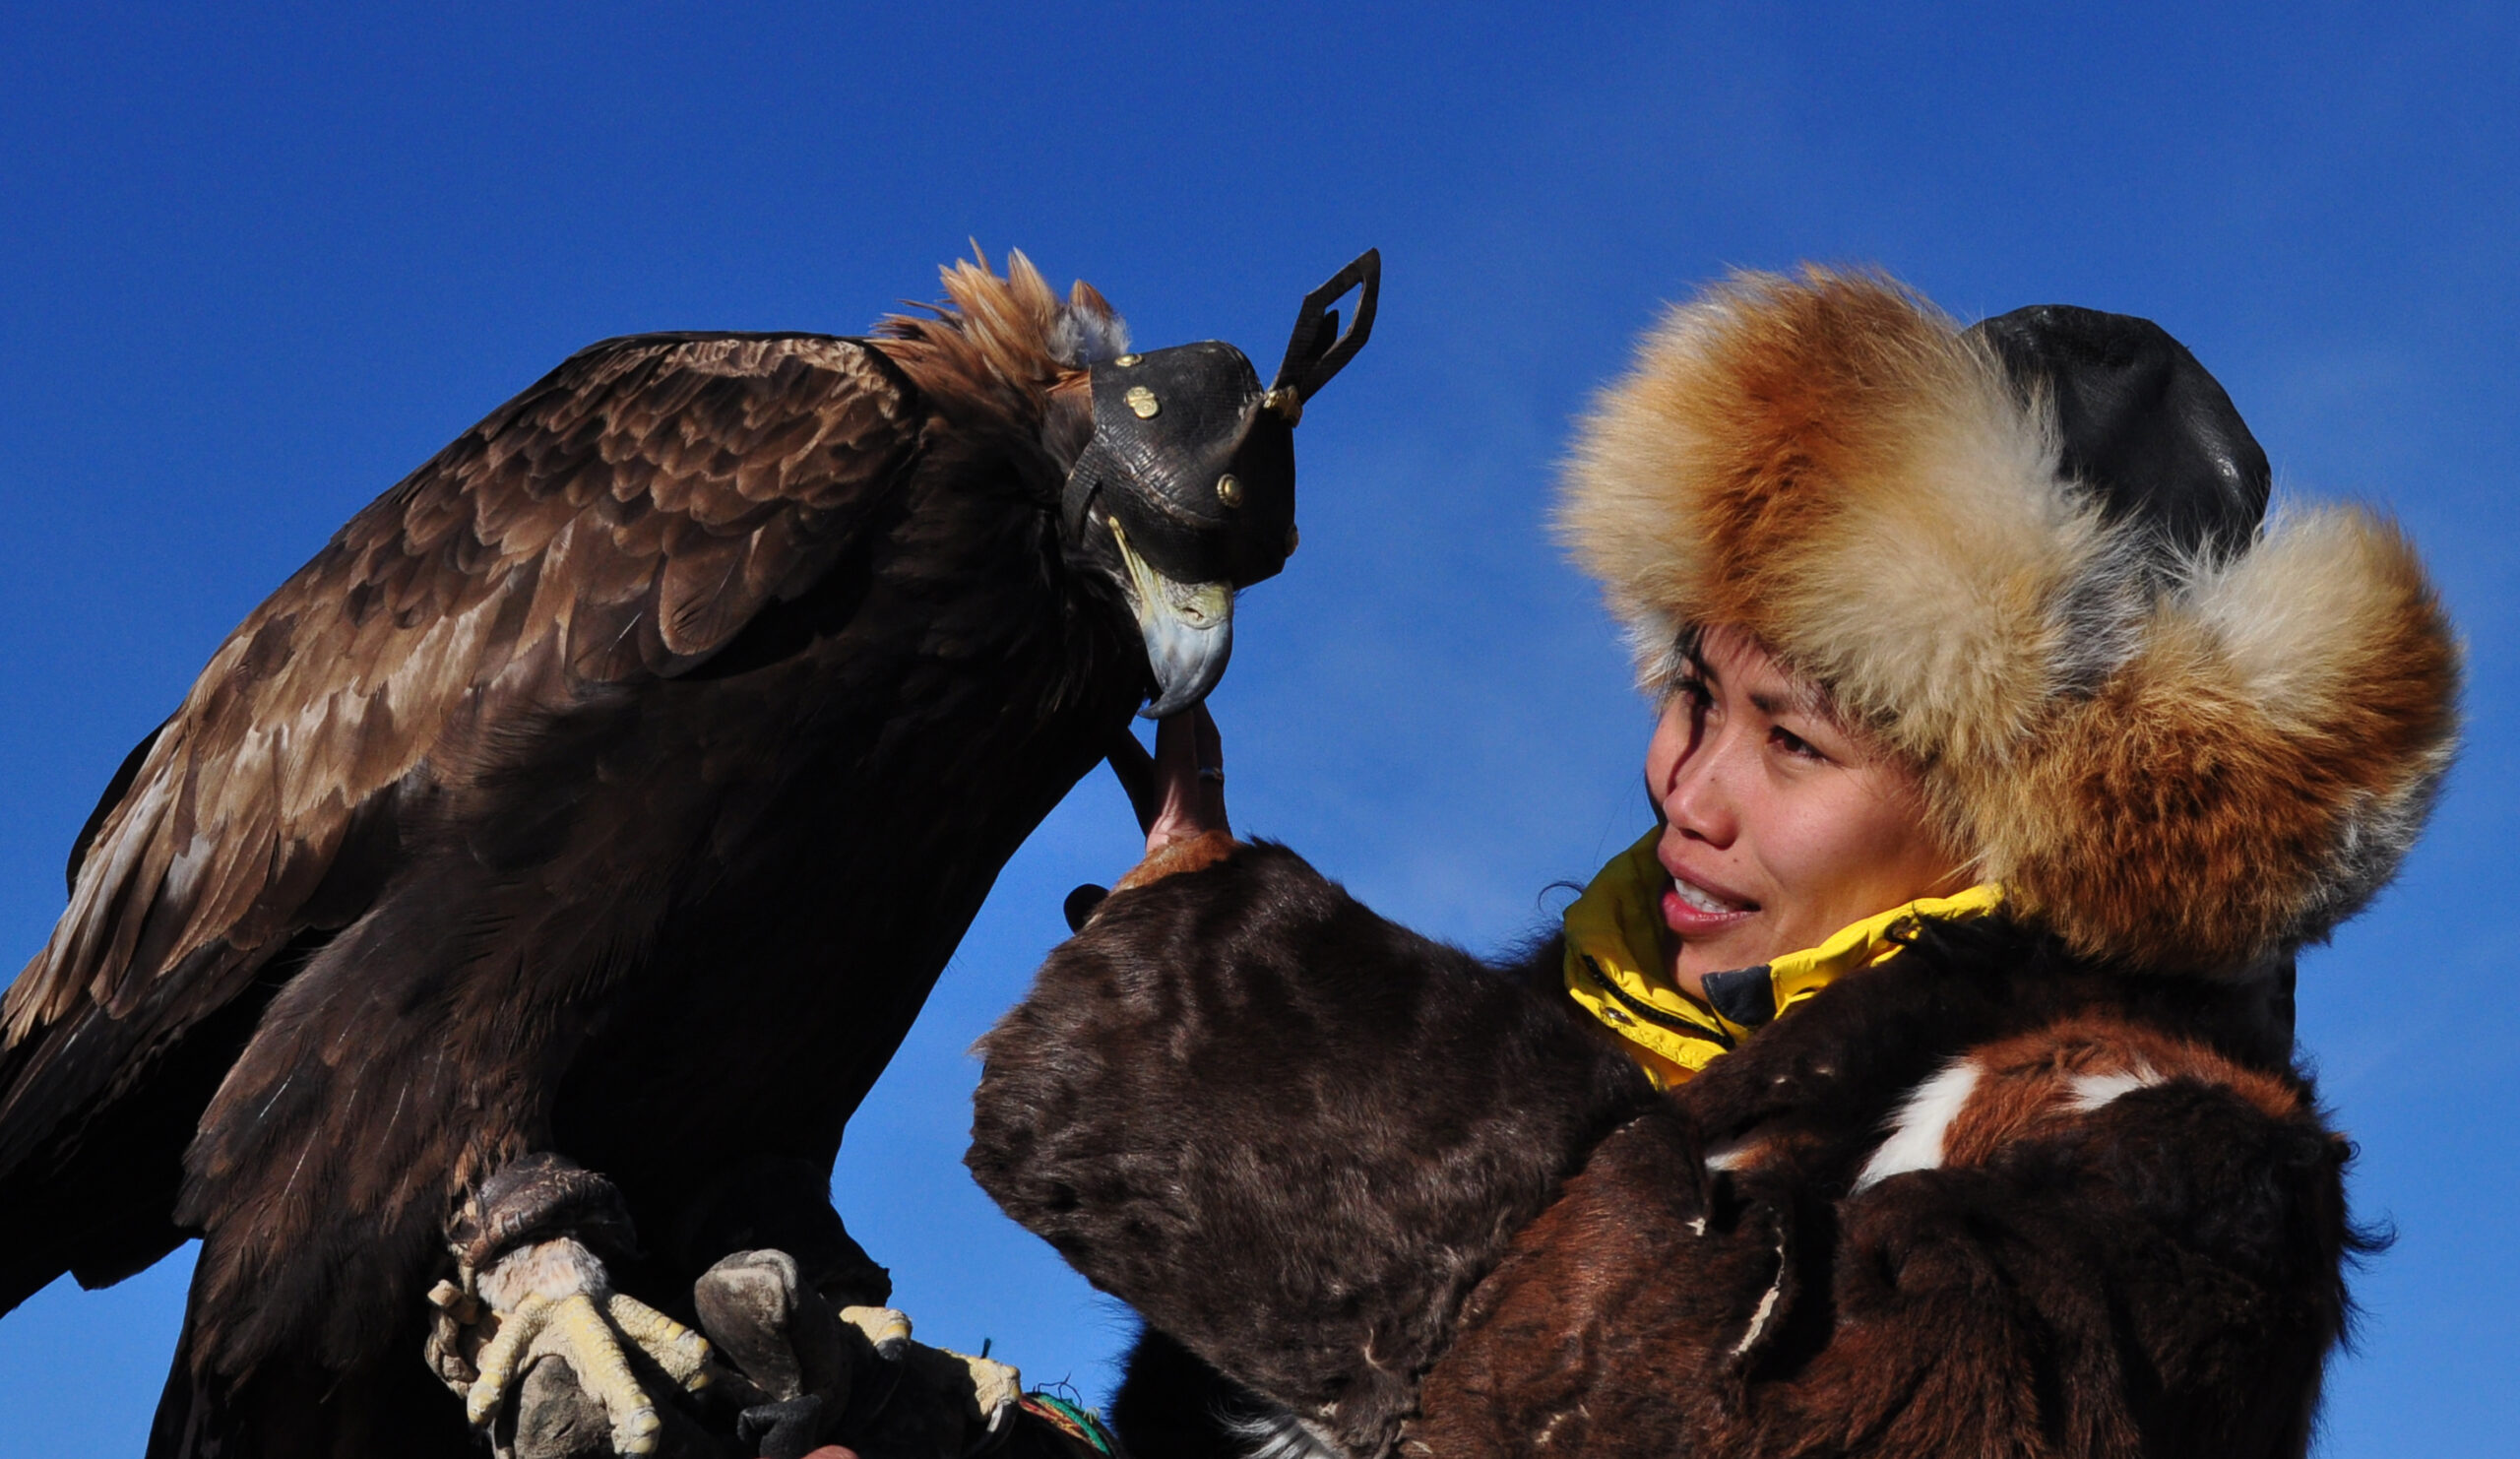 Mongolian Hunters and Eagles in 3D - Mongolian Hunters and Eagles in 3D